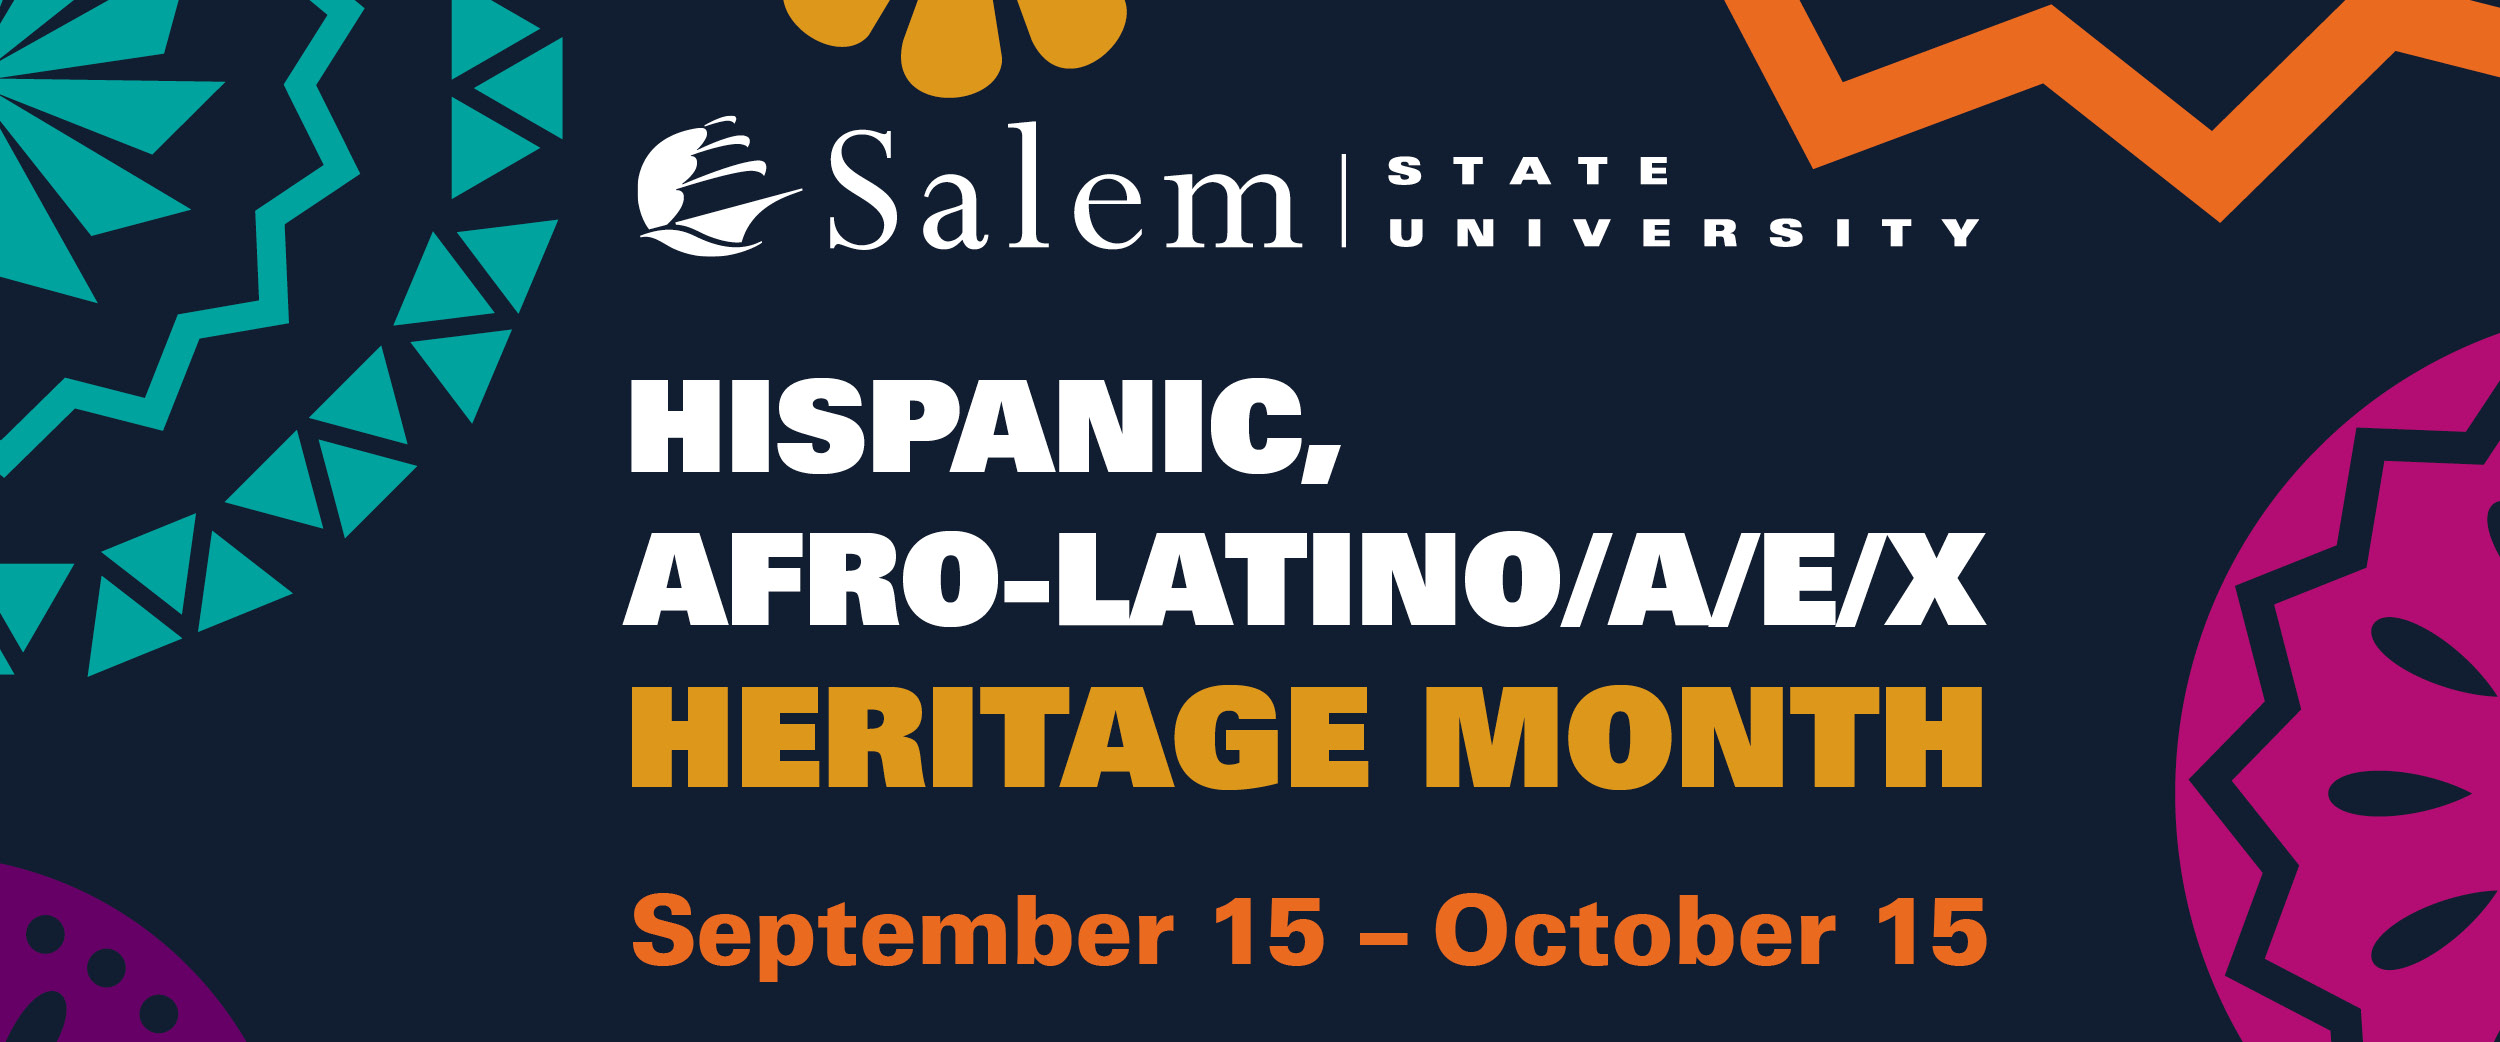 Banner: Hispanic, Afro-Latino/a/e/x Heritage Month: September 15-October 15